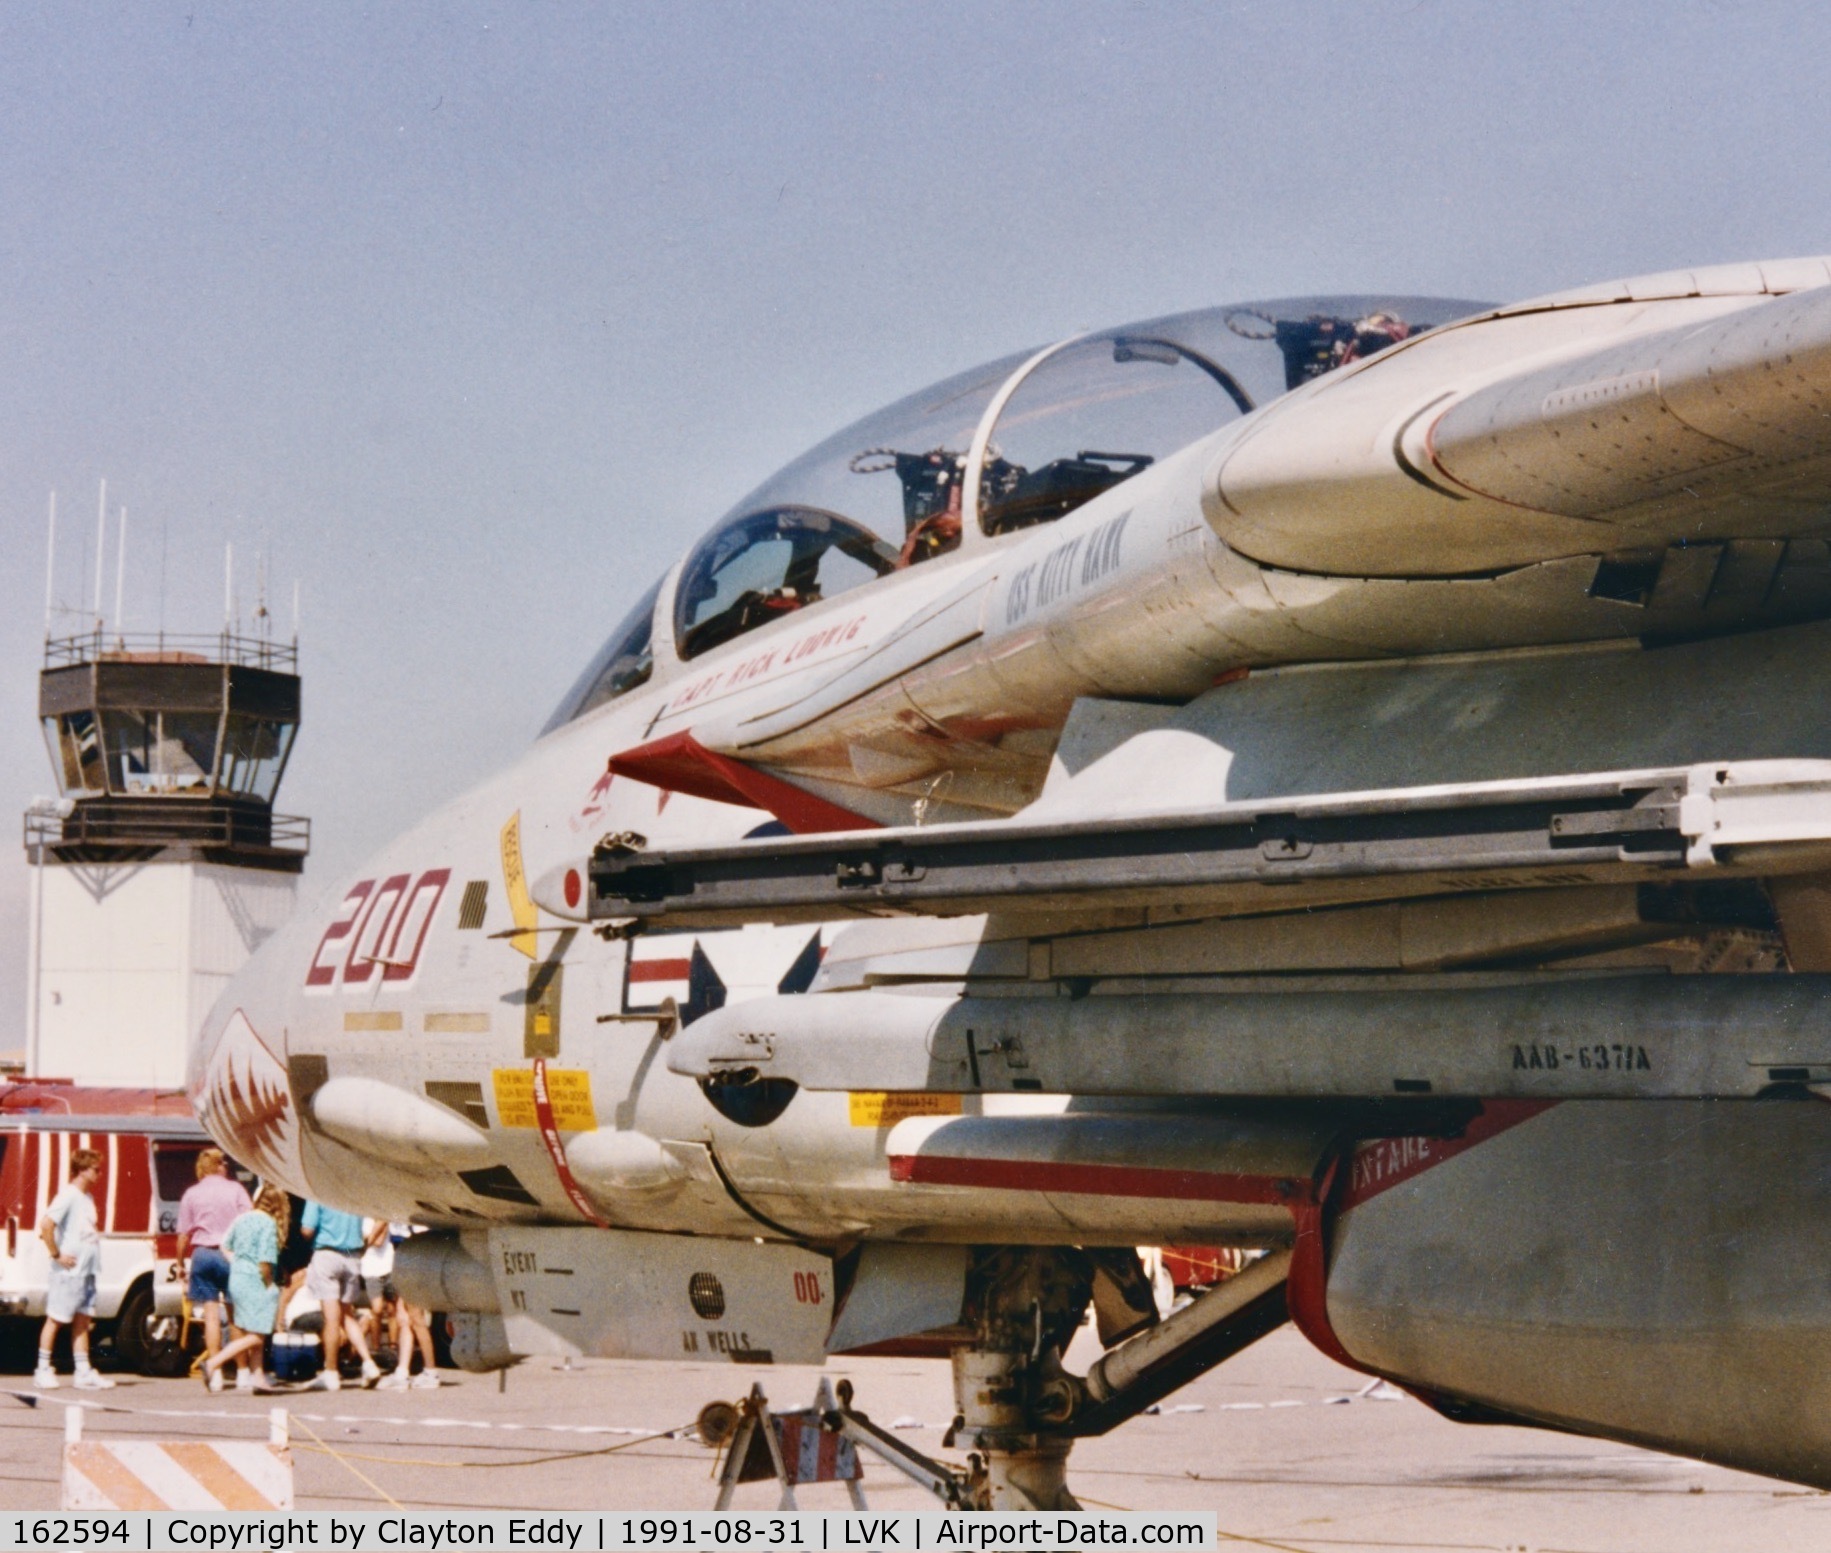 162594, Grumman F-14A C/N 516, Livermore Airport California 1991. VF-111 Sundowner. Captain Rick 'Wigs' Ludwig and Kevin 'Soy' Roe. This same aircraft crashed in the Gulf of Mexico 2002. Pilots minor injuries.